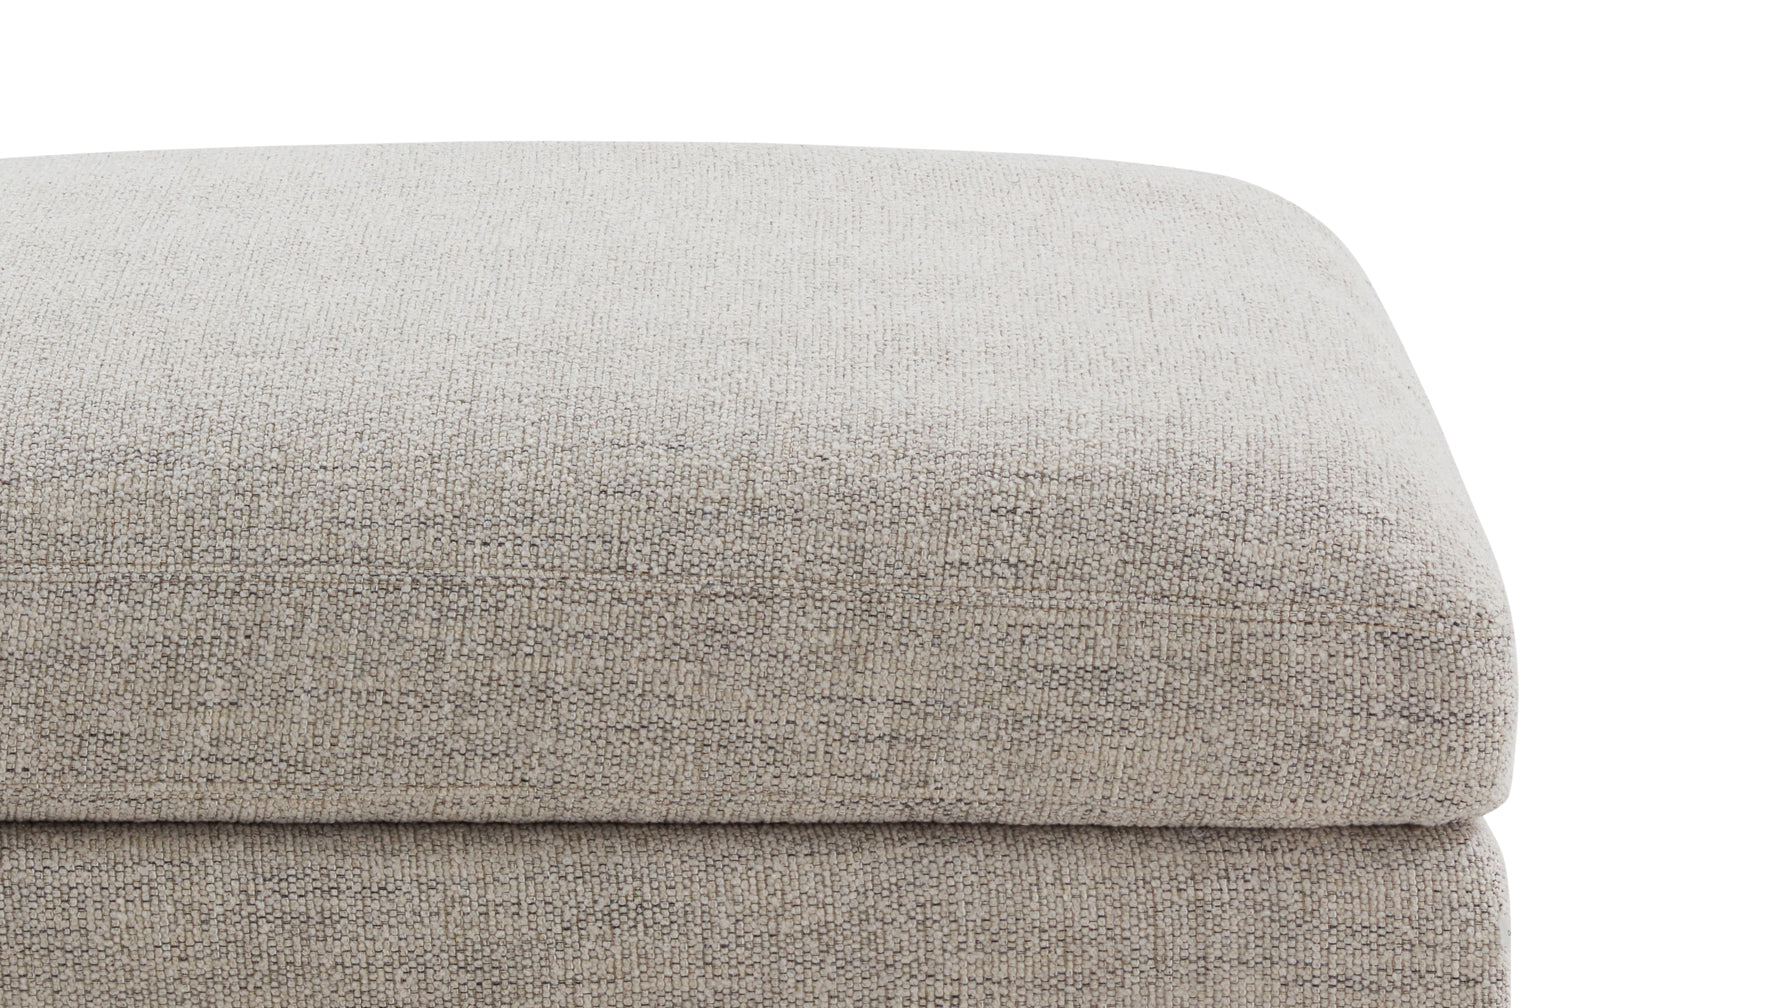 Get Together™ Ottoman, Large, Oatmeal - Image 8